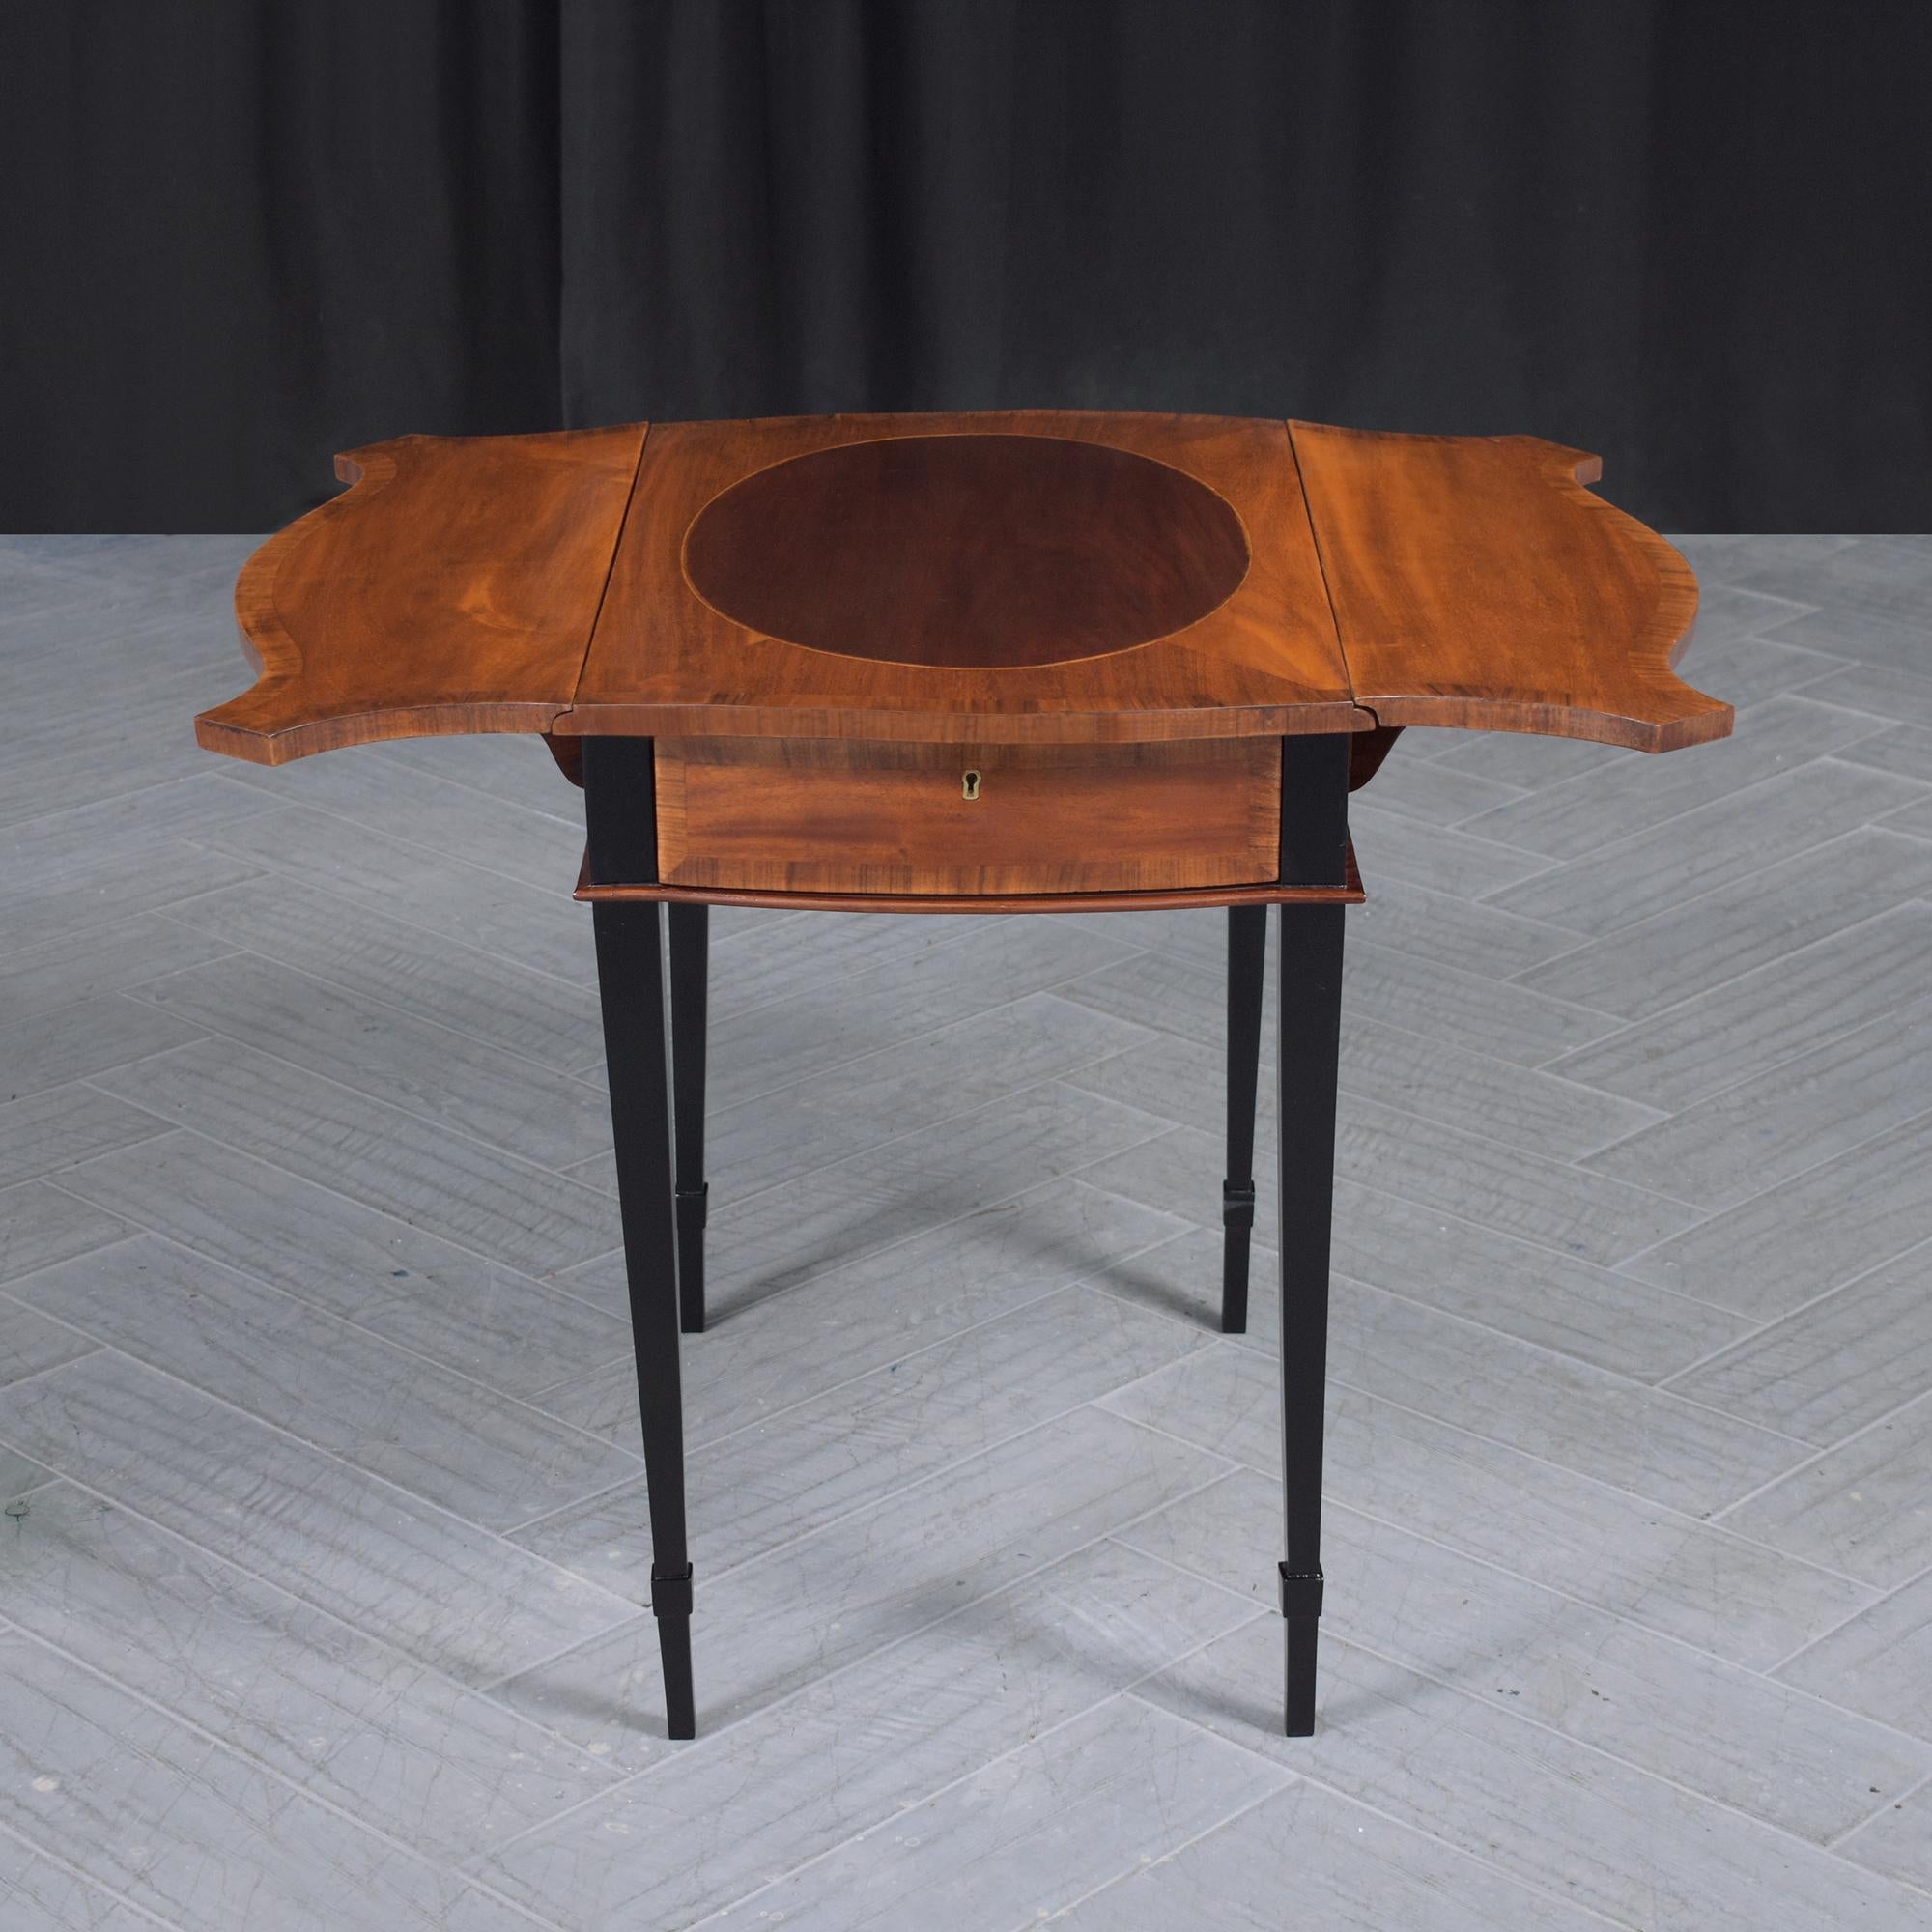 Discover our expertly restored late 19th-century Pembroke table, a testament to fine craftsmanship and timeless elegance. Hand-hewn from resilient mahogany wood, this antique side table gleams with a rich mahogany finish complemented by ebonized